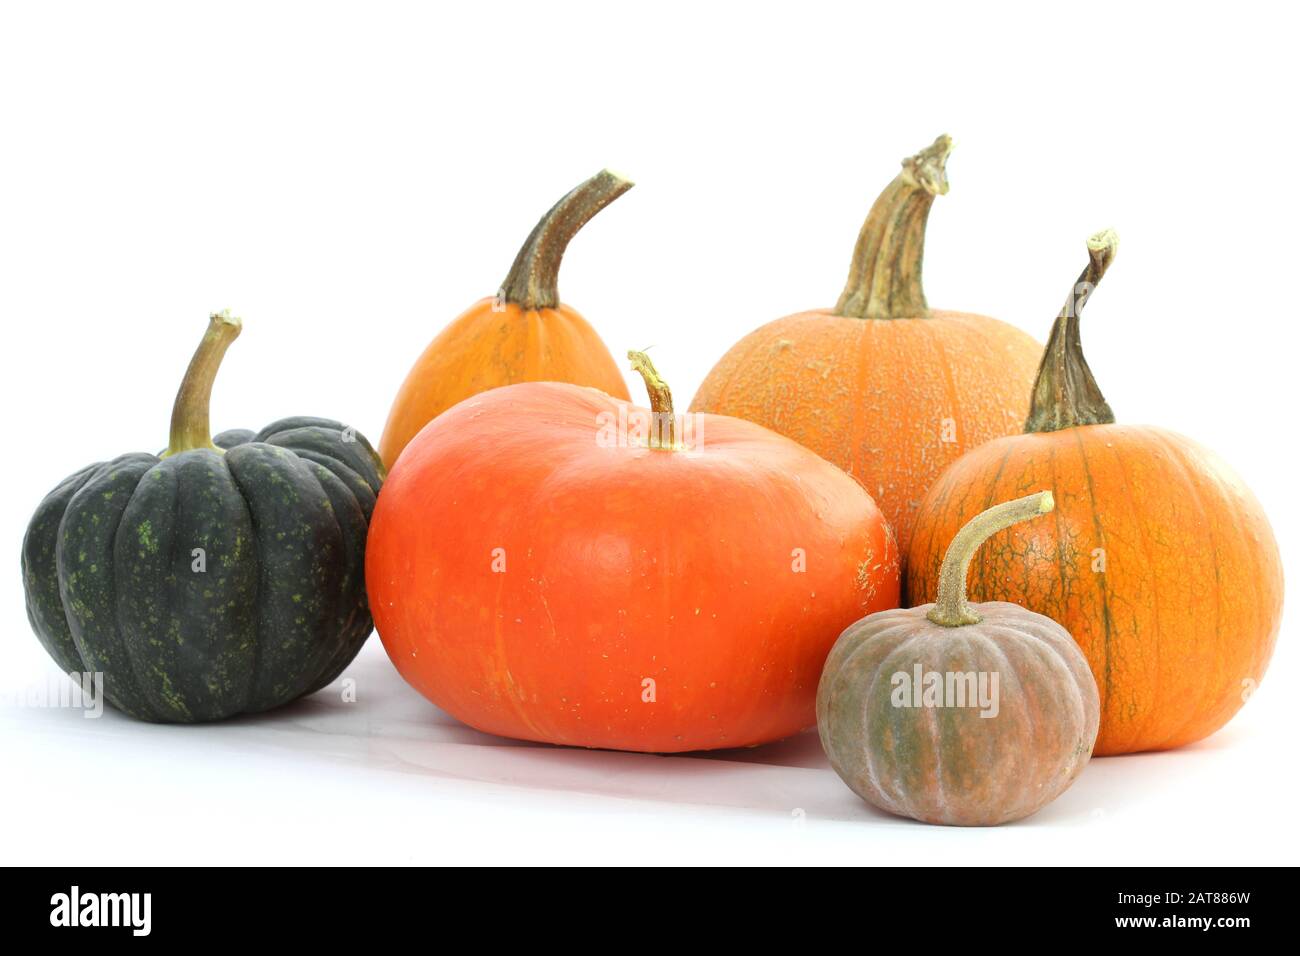 Varieties of pumpkins on white background Stock Photo